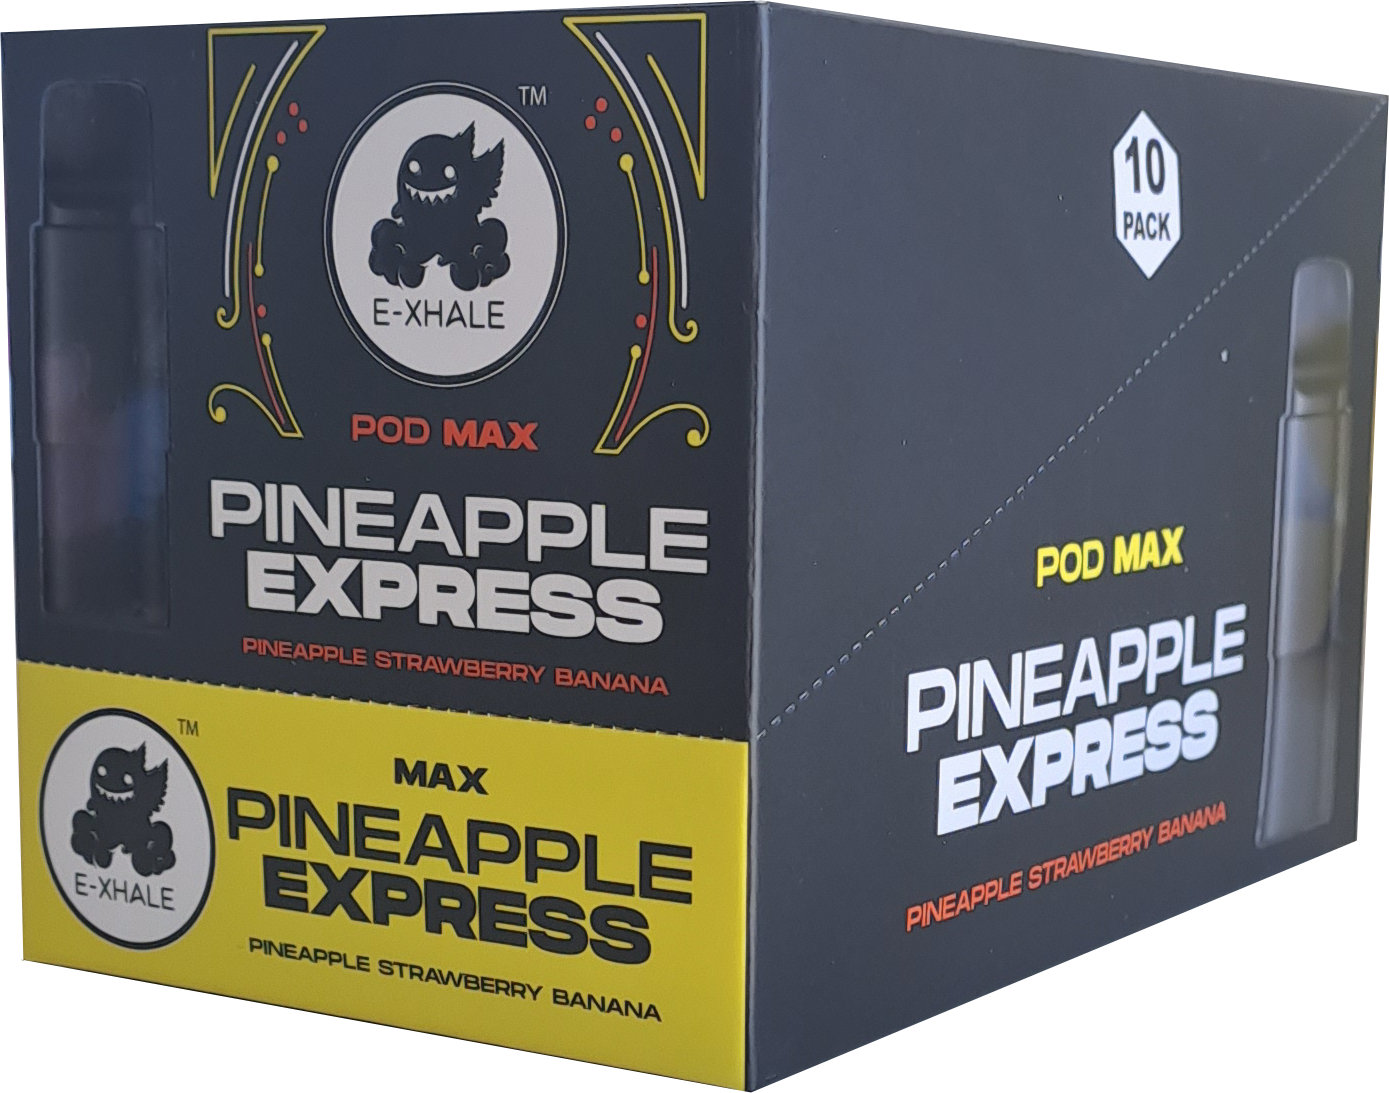 PINEAPPLE EXPRESS: 10 PACK